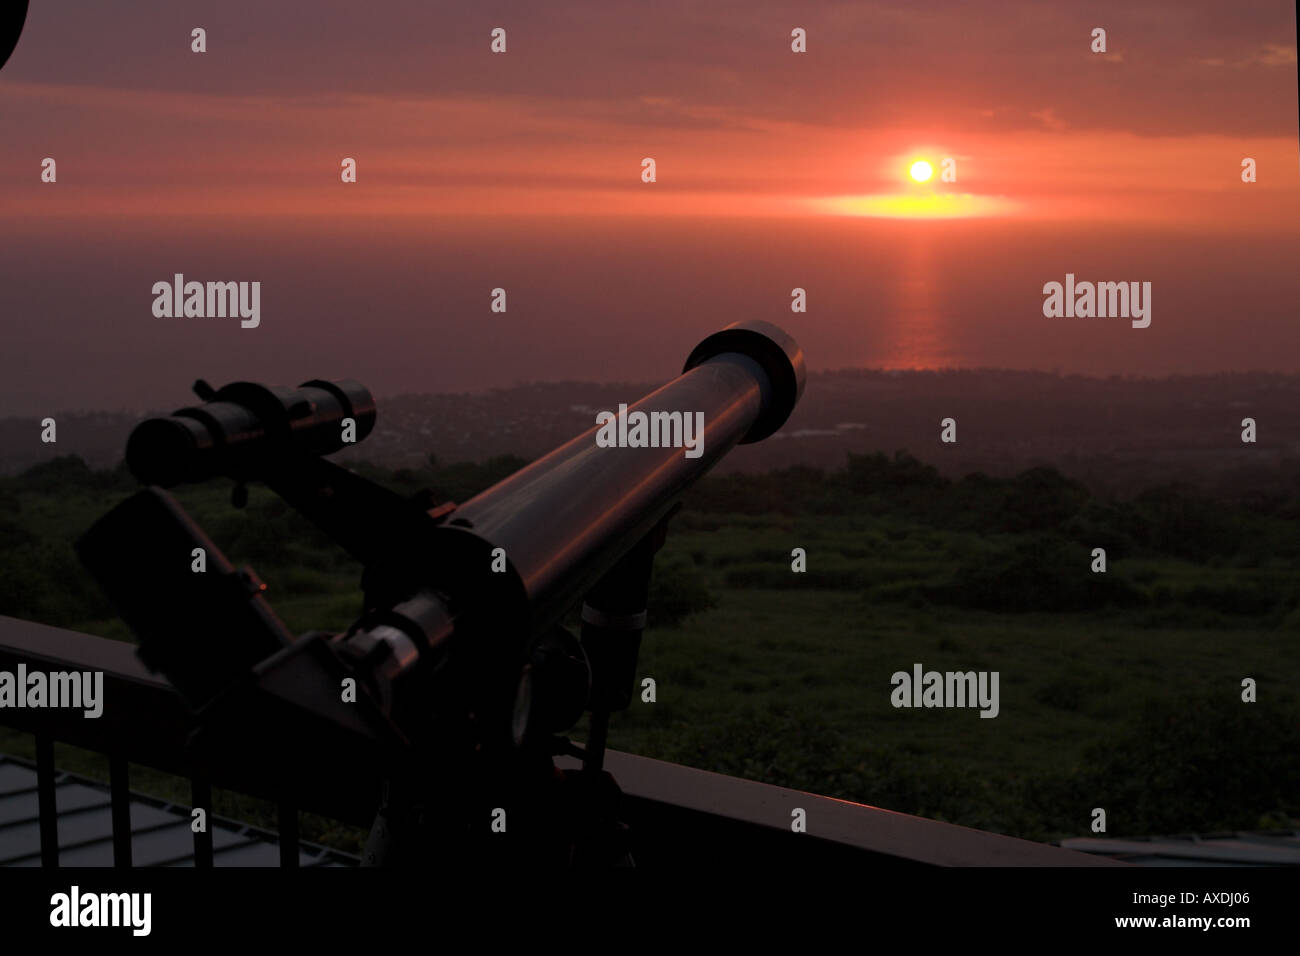 Aiming for the Sunset: A small telescope perched high above the Kailua Kona coast is aimed at the warm red glow of a setting sun Stock Photo